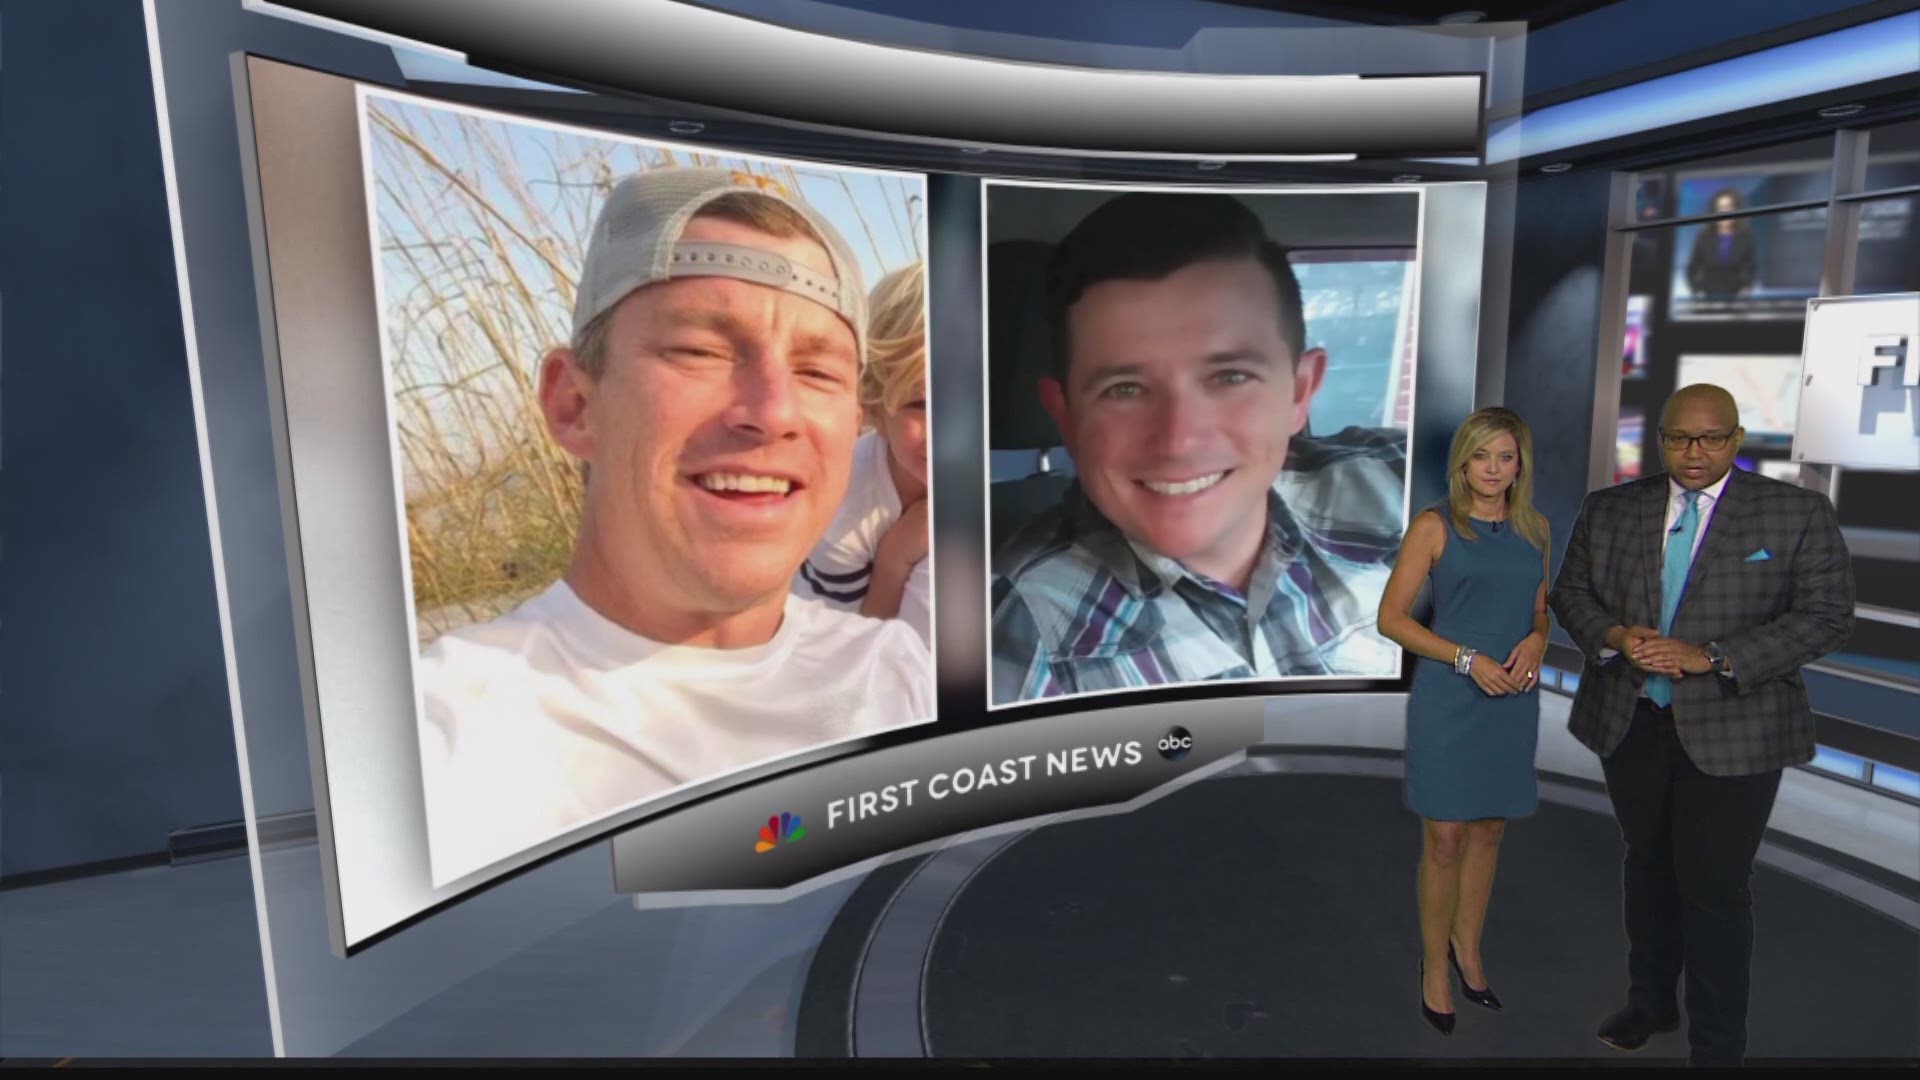 This week marks one month since Brian McCluney and Justin Walker, two off-duty firefighters went fishing in Port Canaveral and vanished. Now Brian McCluney's wife is